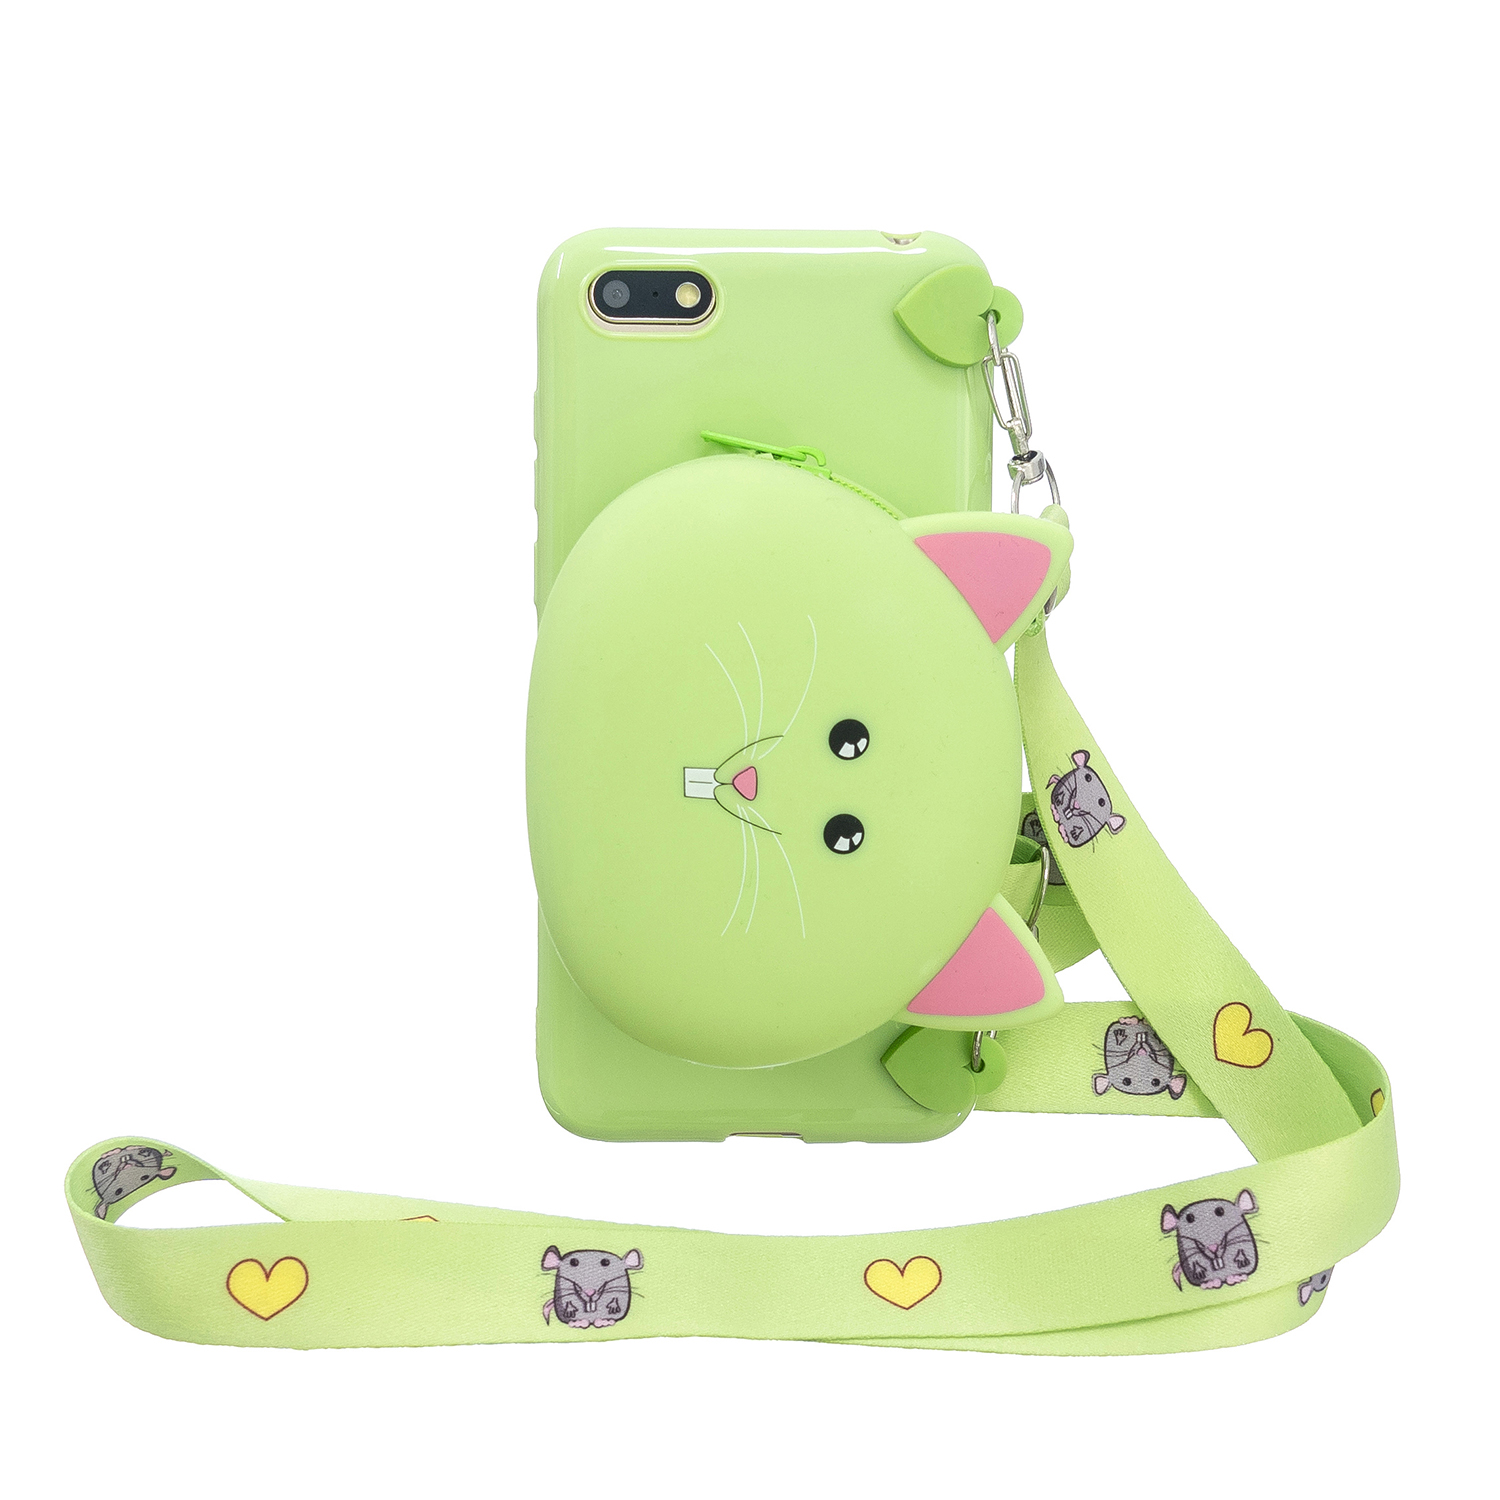 For HUAWEI Y5 2018/Y5 2019 Cellphone Case Mobile Phone Shell Shockproof TPU Cover with Cartoon Cat Pig Panda Coin Purse Lovely Shoulder Starp  Green